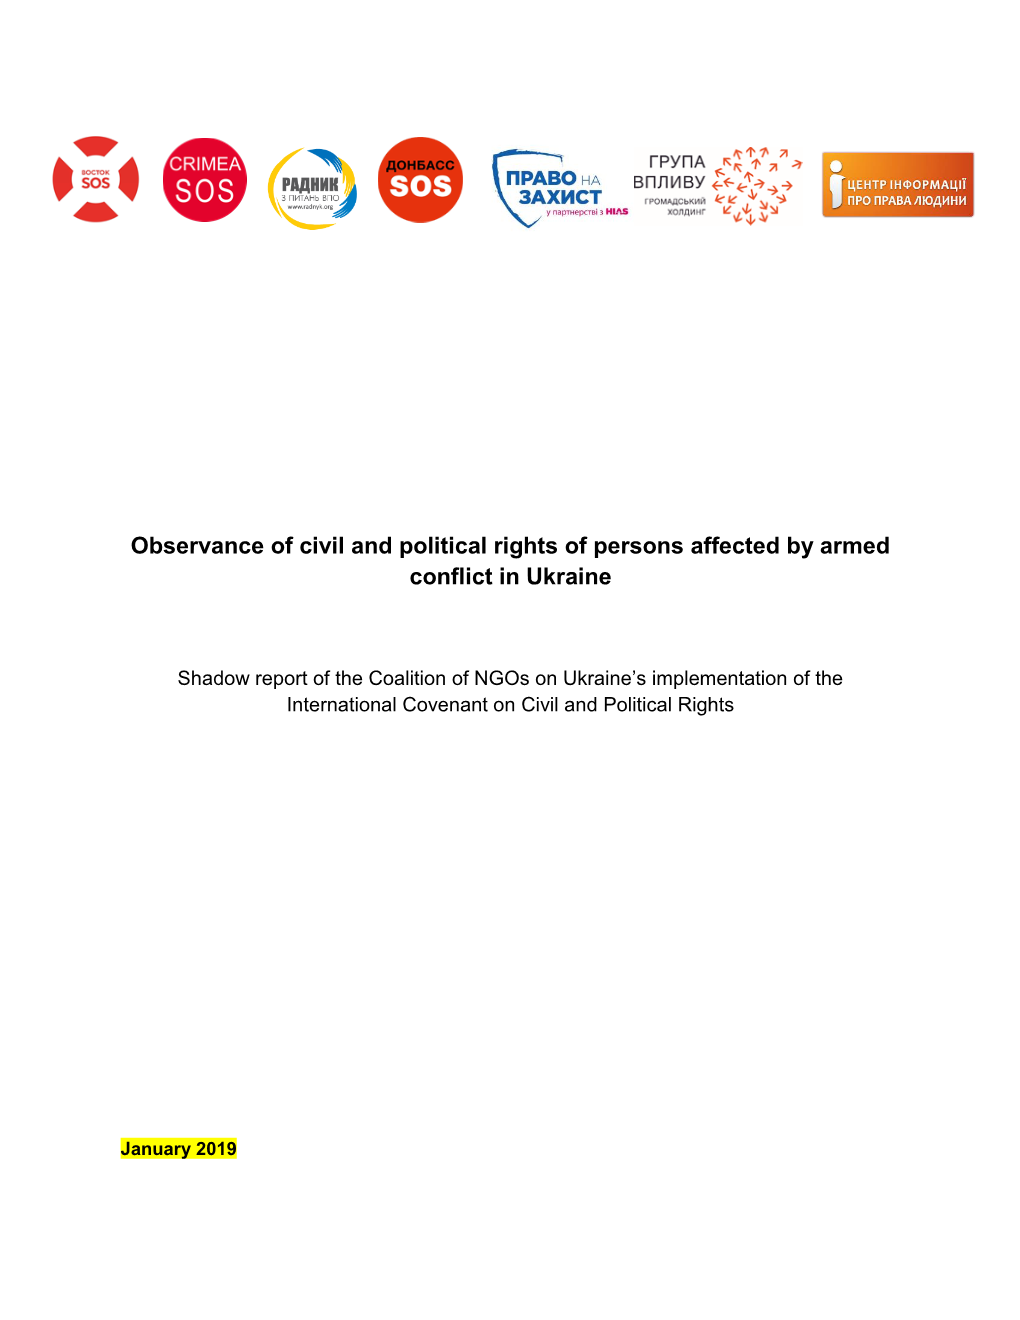 Observance of Civil and Political Rights of Persons Affected by Armed Conflict in Ukraine